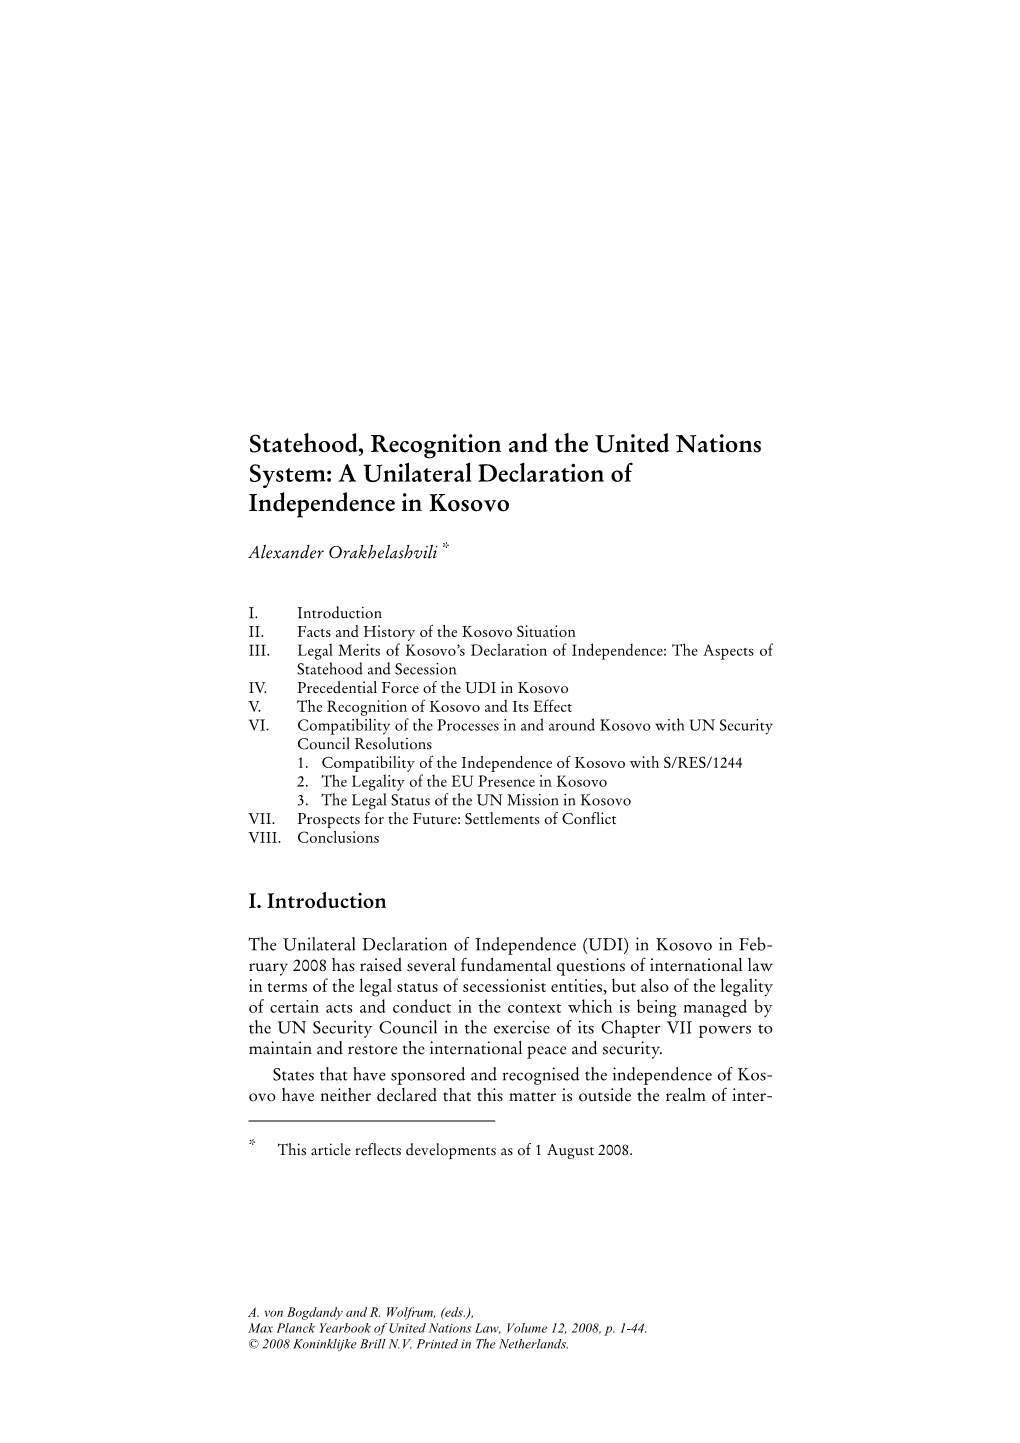 Statehood, Recognition and the United Nations System: a Unilateral Declaration of Independence in Kosovo